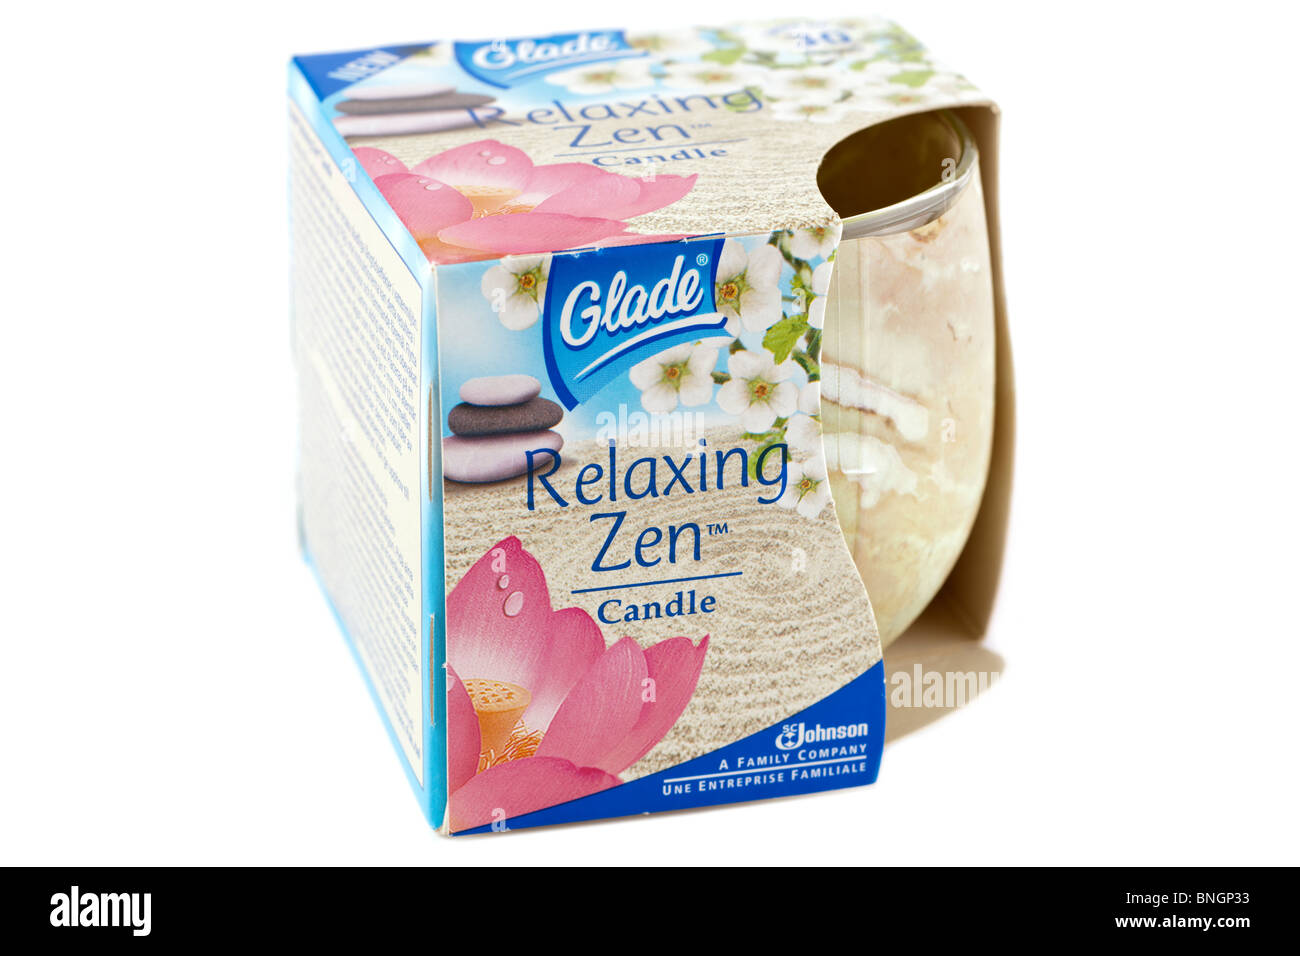 Glade boxed relaxing zen candle Stock Photo